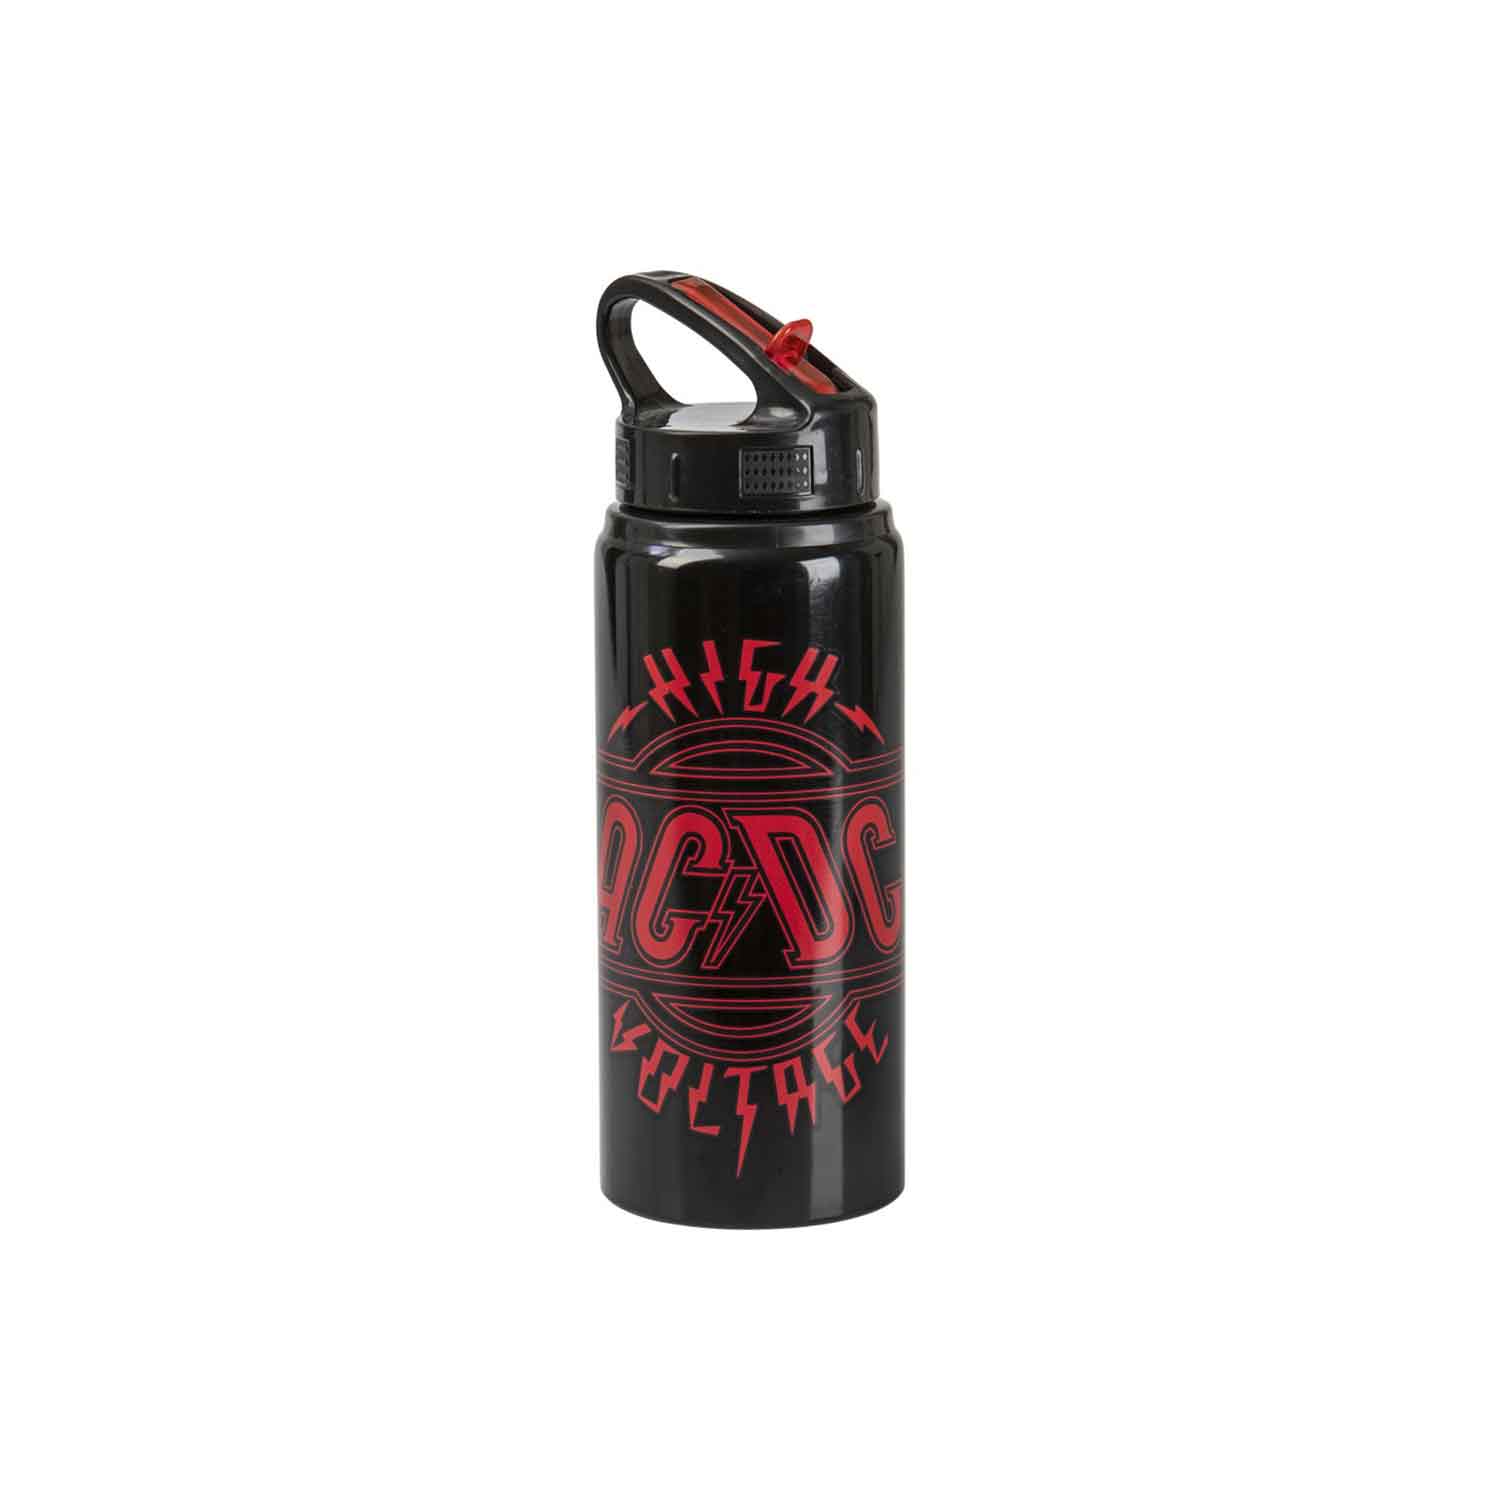 Call a Firefighter Thermos Bottle